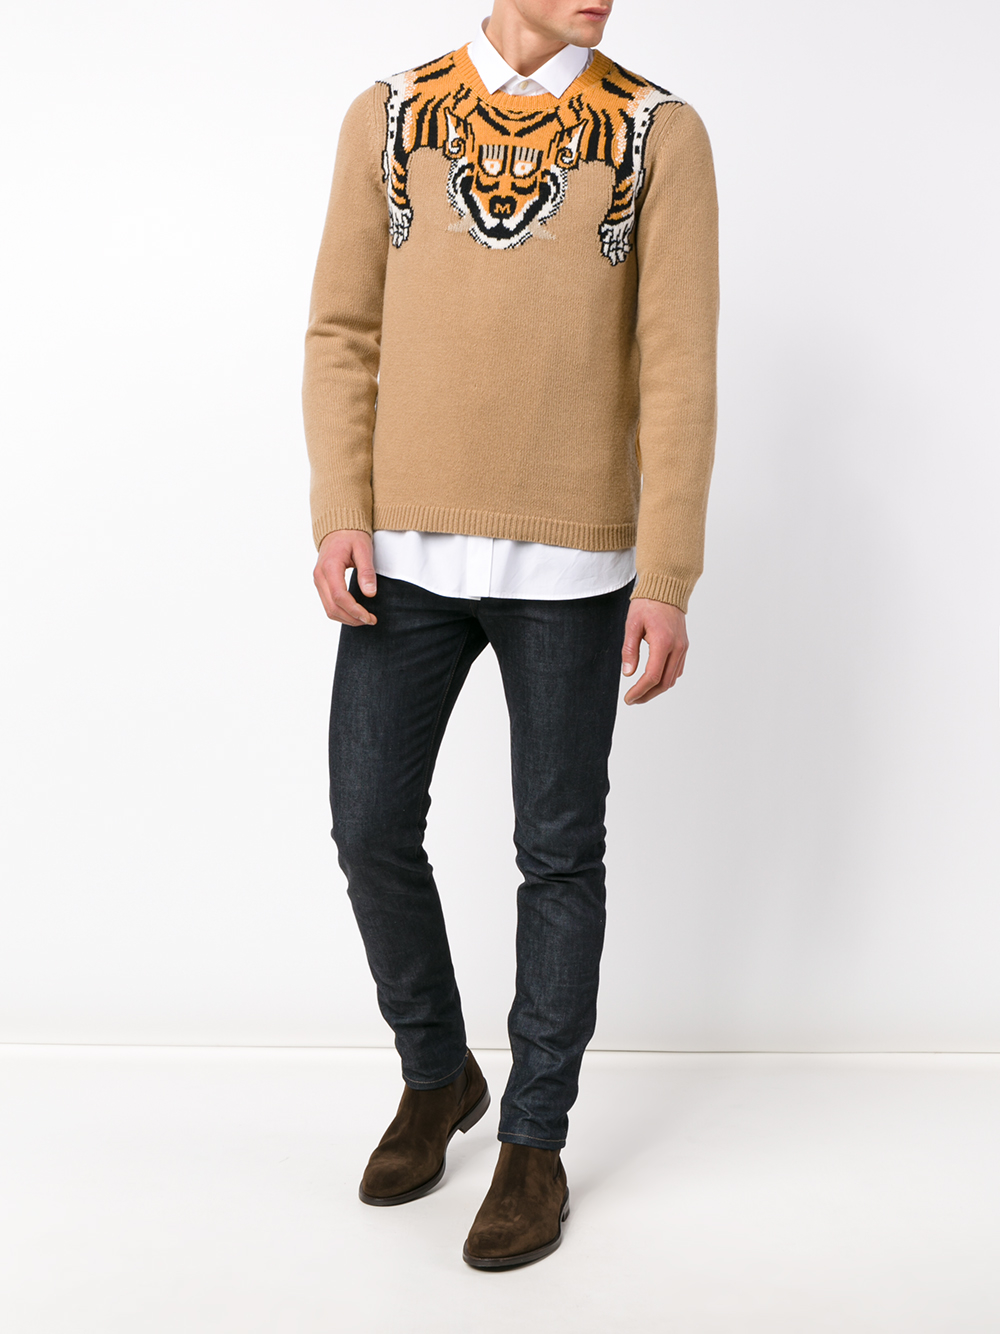 Gucci Fine Merino Wool Tiger Knit in Beige (Natural) for Men - Lyst